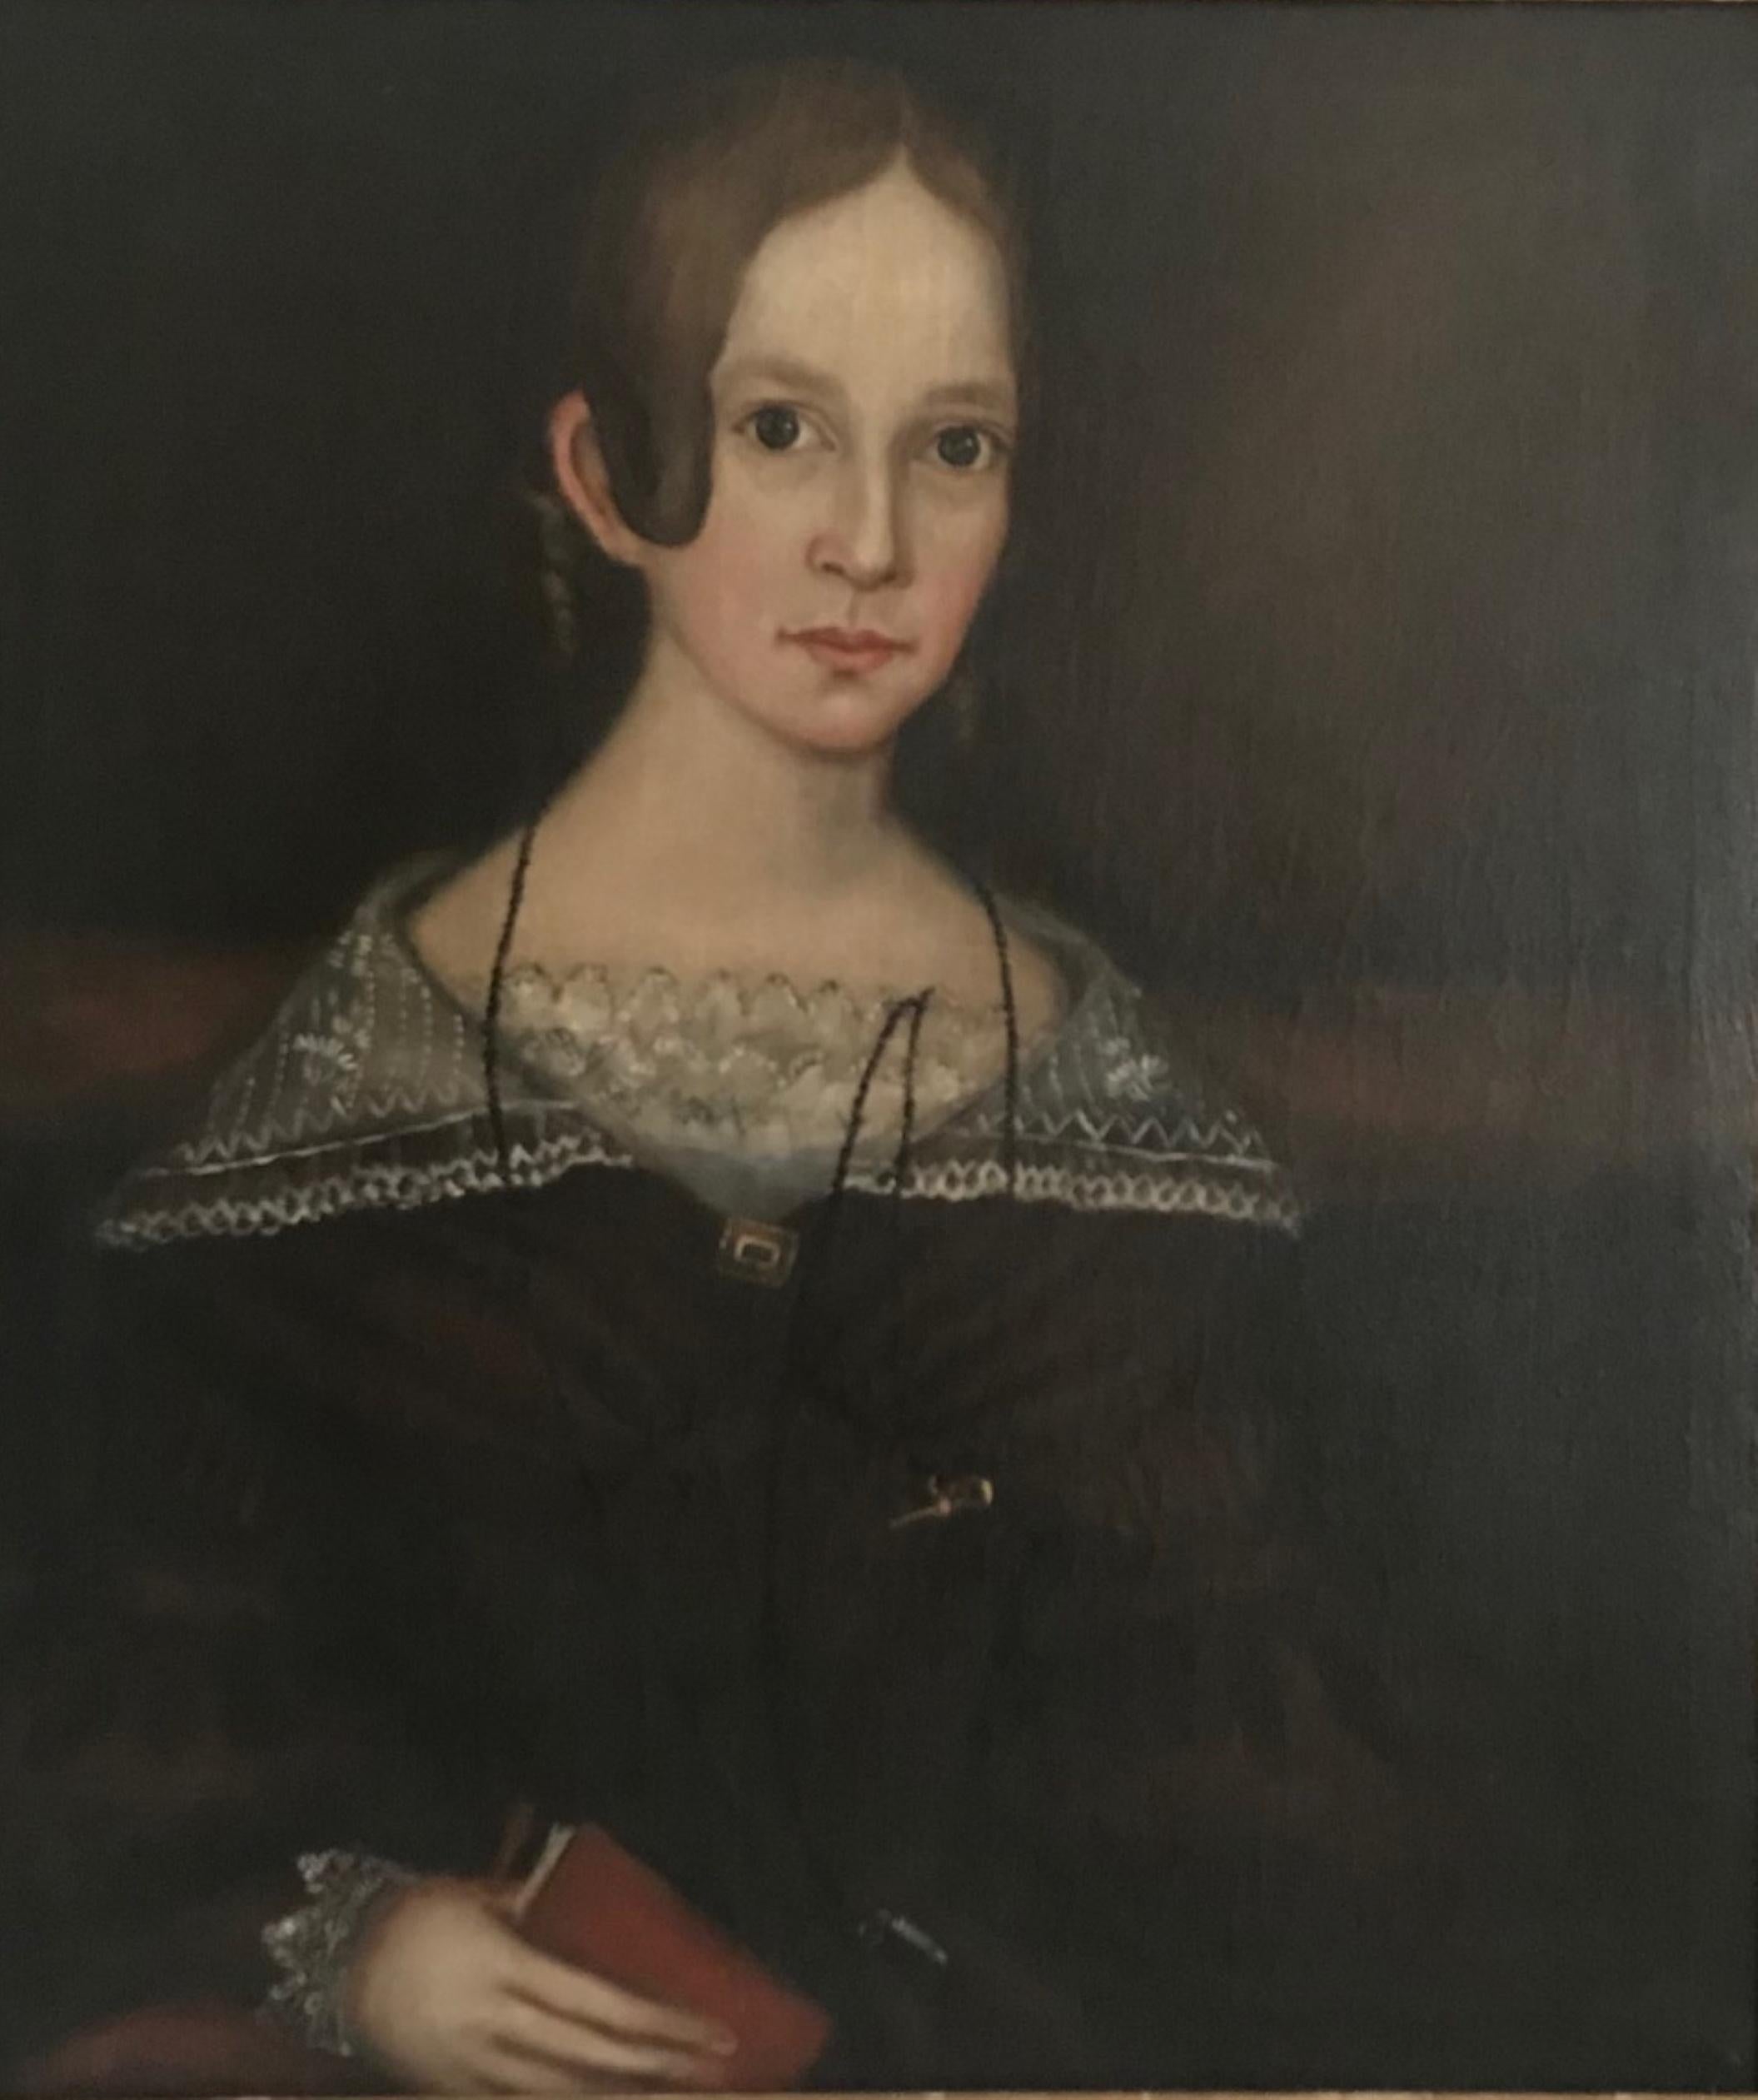 Superb Ammi Phillips American Folk Art Portrait painting, circa 1840

We are proud of our acquisition of this authentic masterpiece by Ammi Phillips (1788-1865).
The finely rendered portrait depicts an attractive young girl in a delightful lifelike